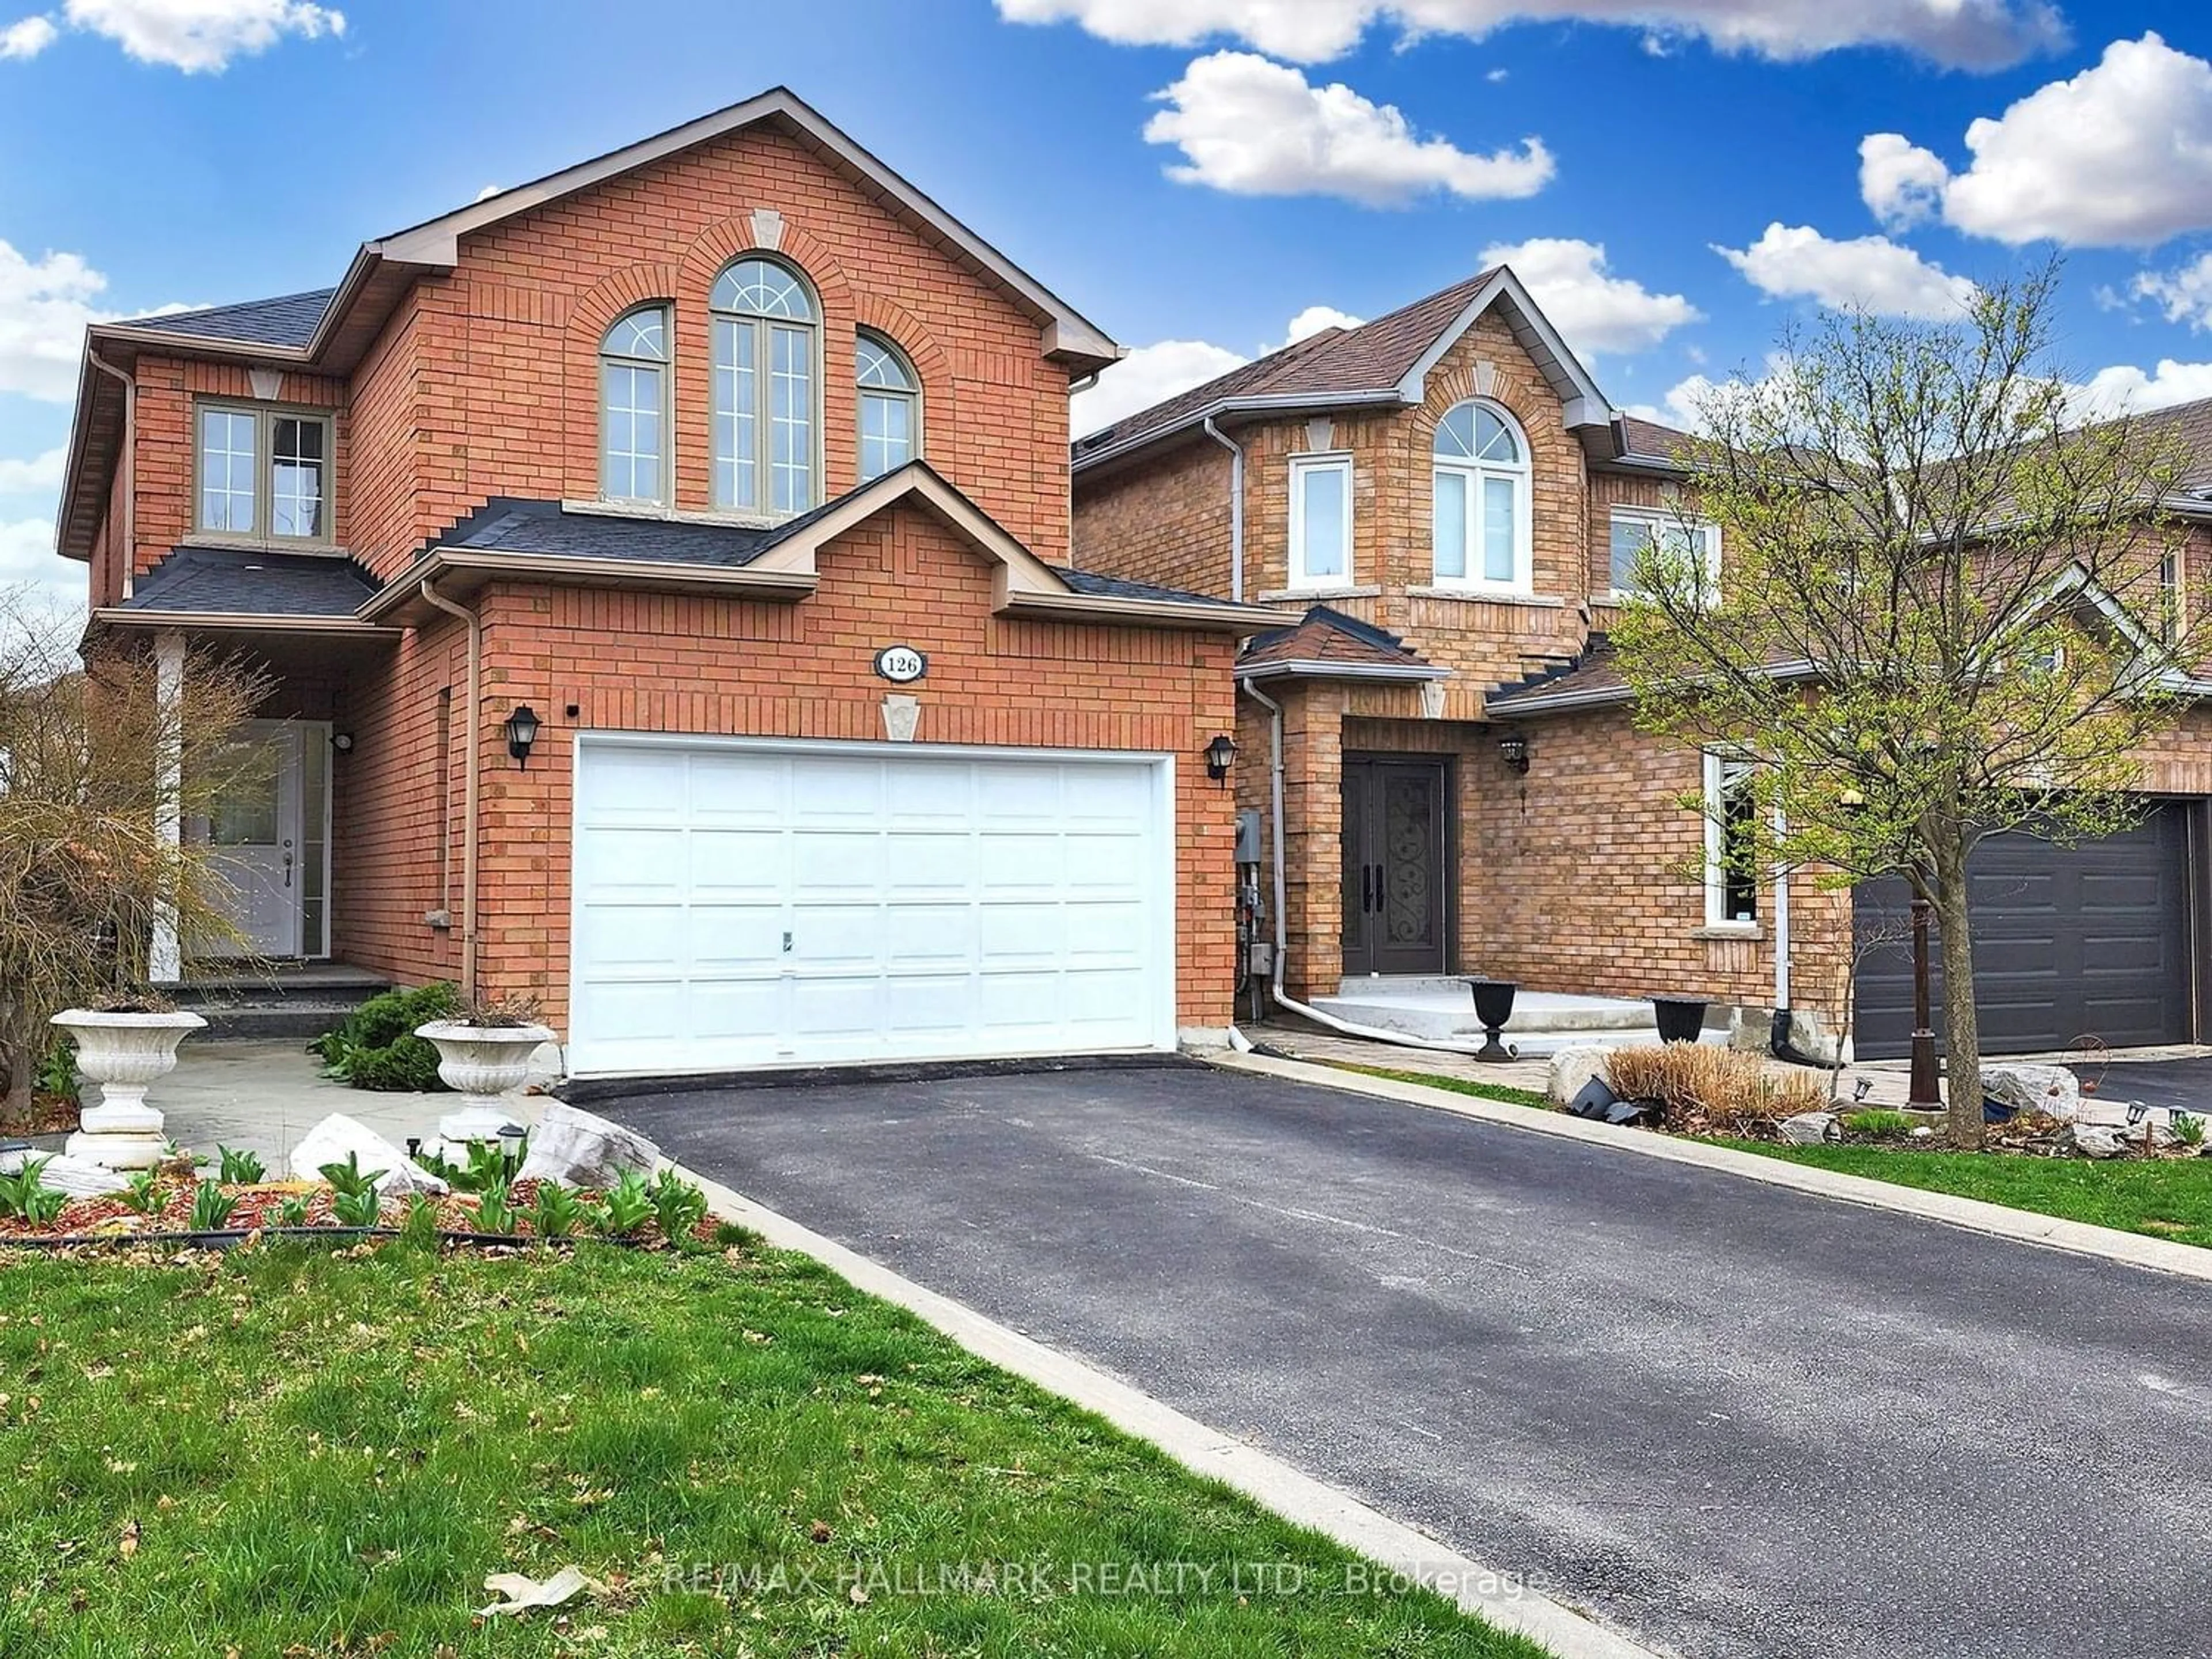 Home with brick exterior material for 126 Villandry Cres, Vaughan Ontario L6A 2P9